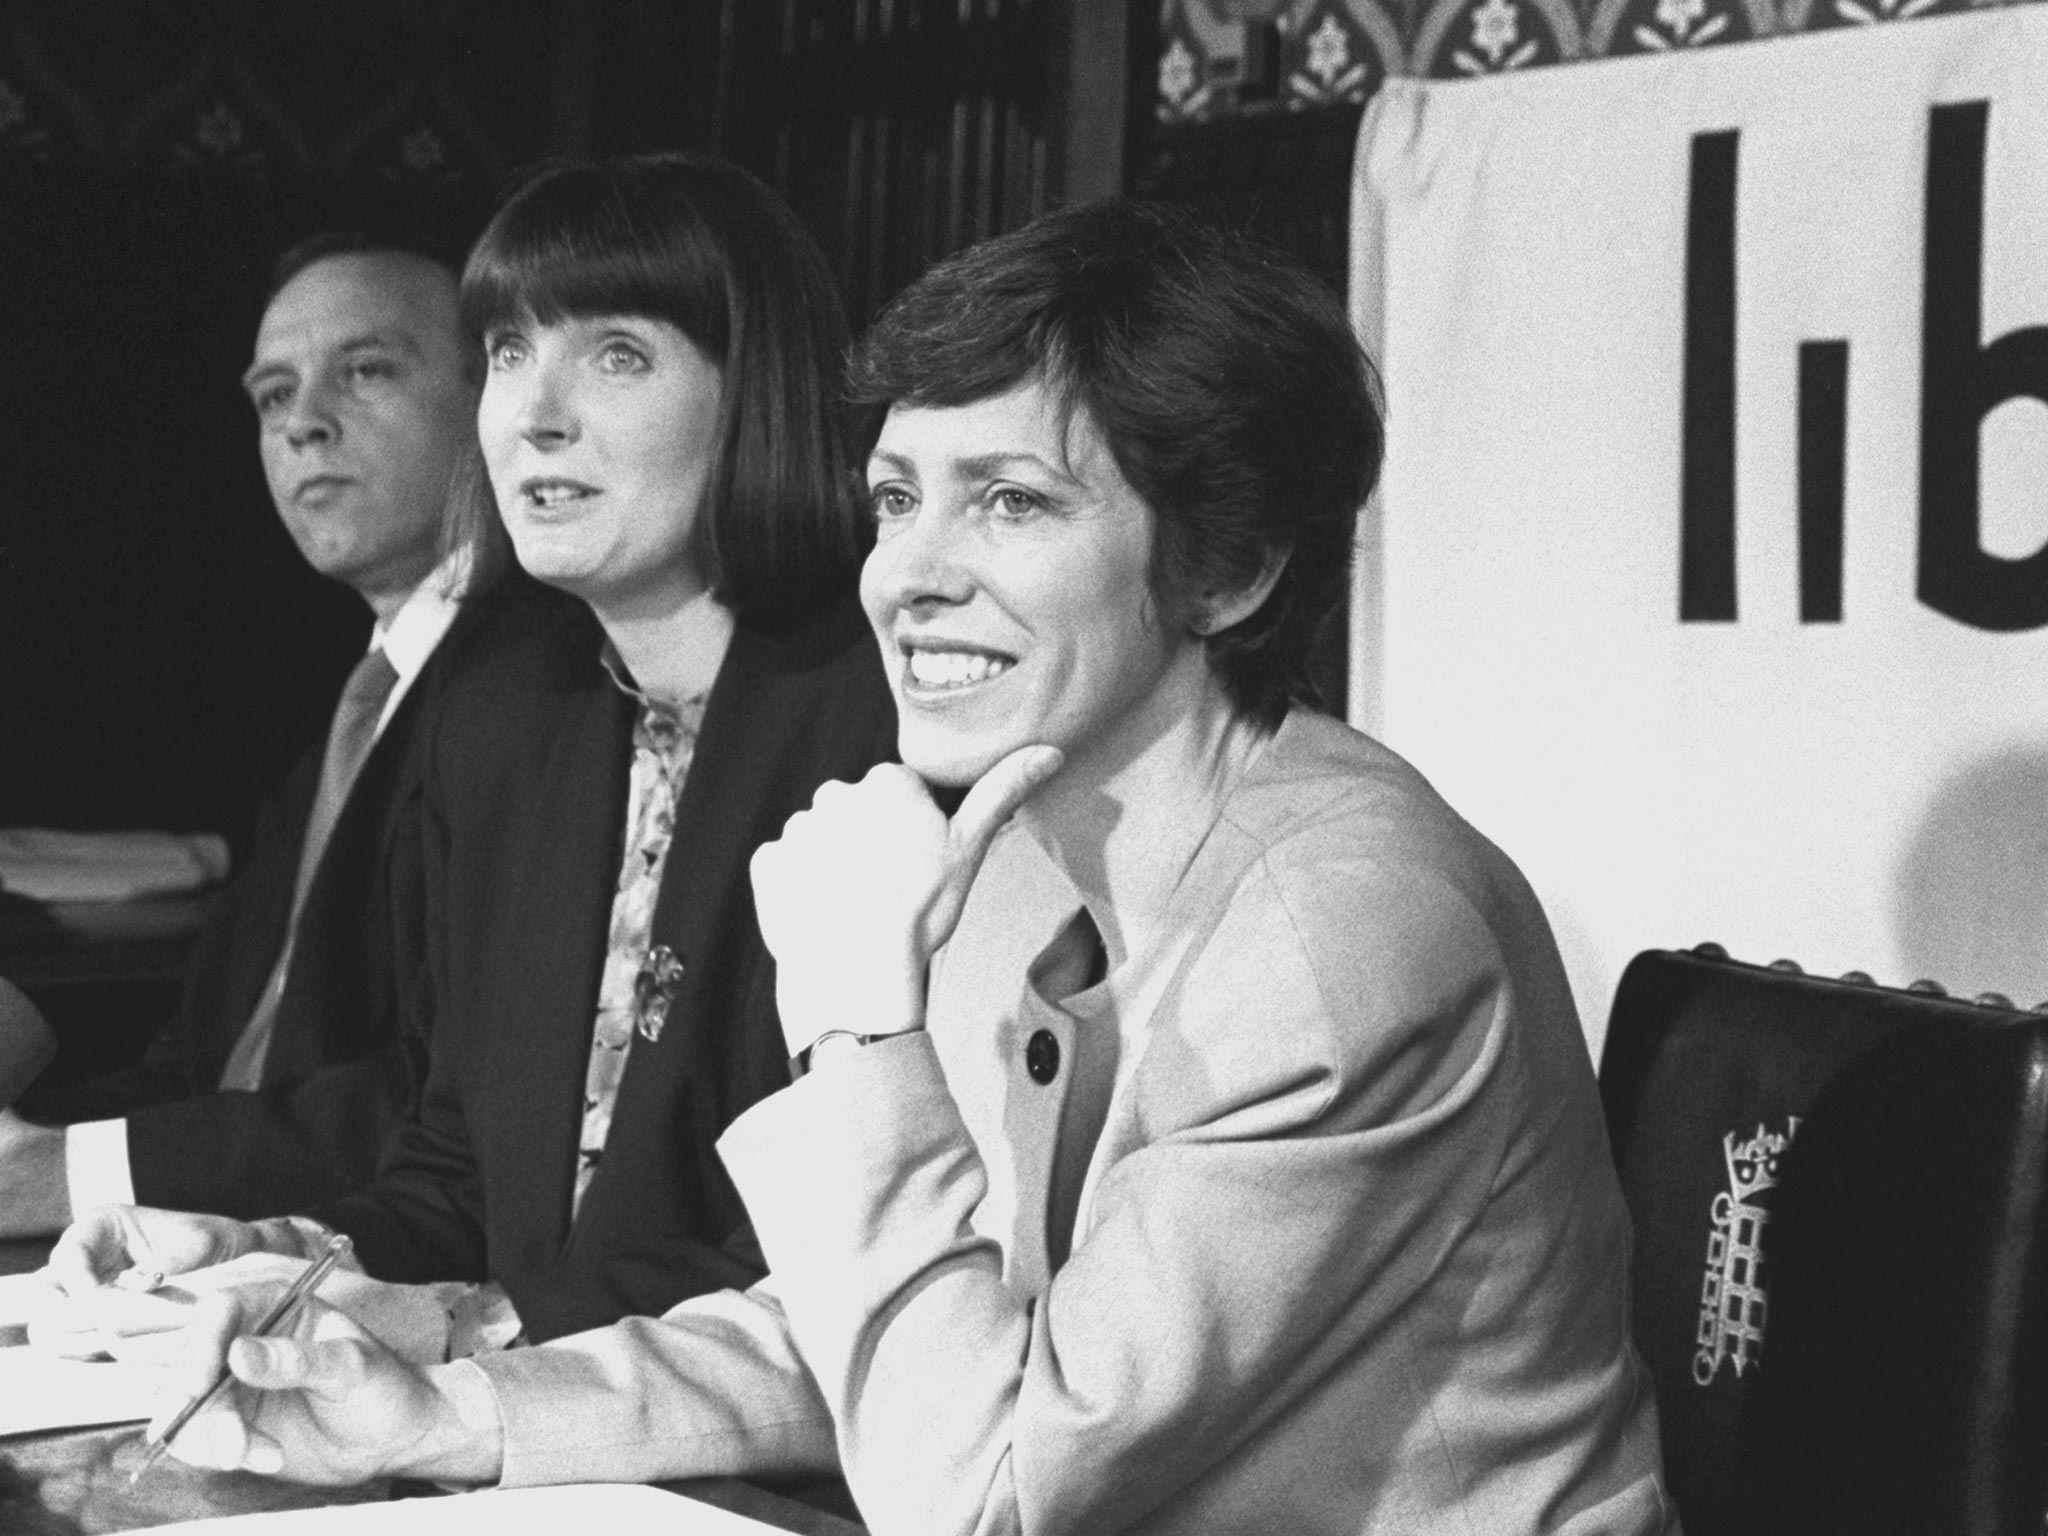 Harriet Harman (centre) and Patricia Hewitt (right) were members of the National Council for Civil Liberties (NCCL) which Anselm Eldergill resigned from due to its links to a paedophile group